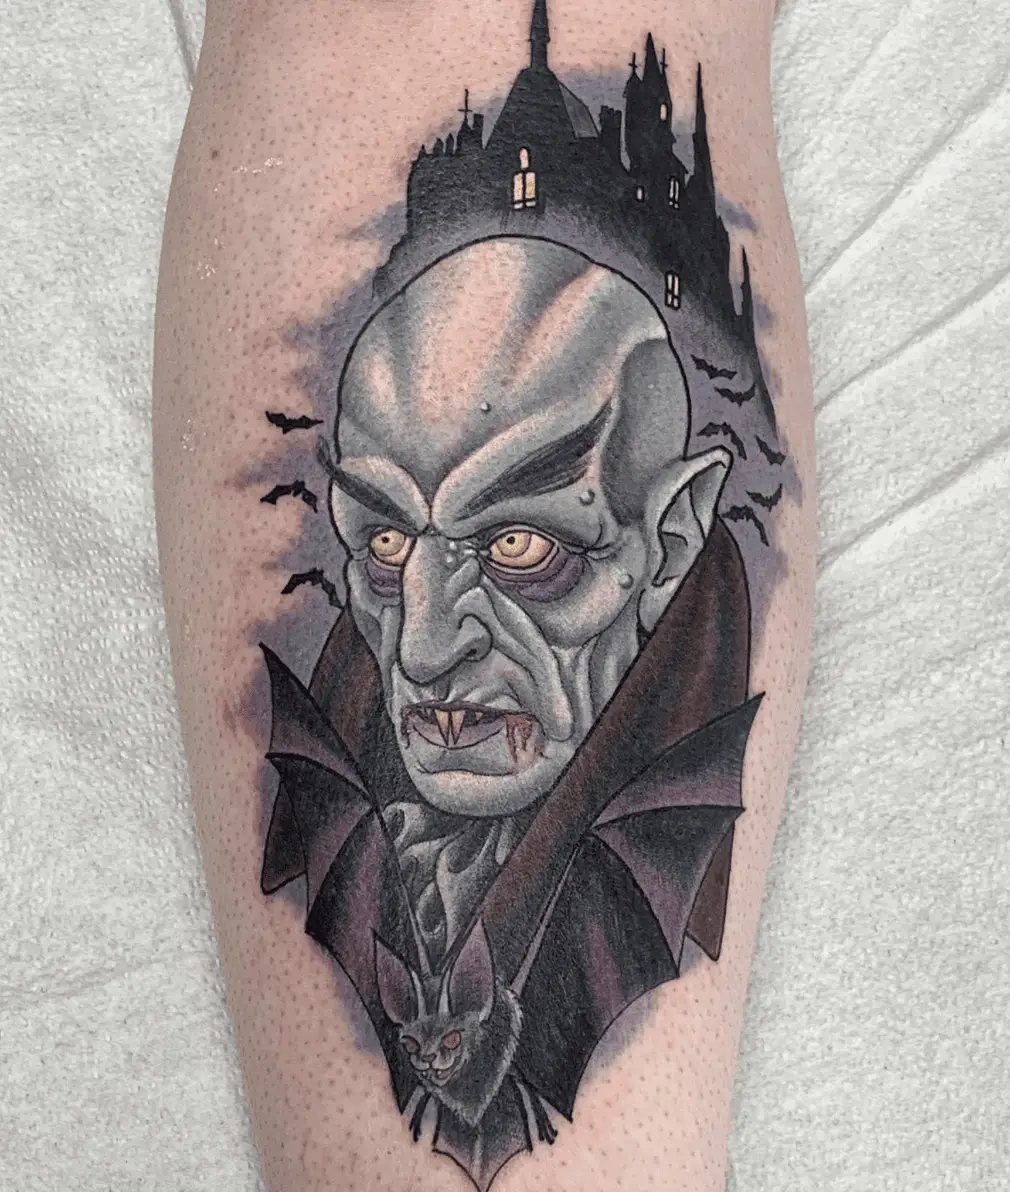 Colored Illustration of Bald Vampire With Bats at the Side and Castle at the Top Arm Tattoo